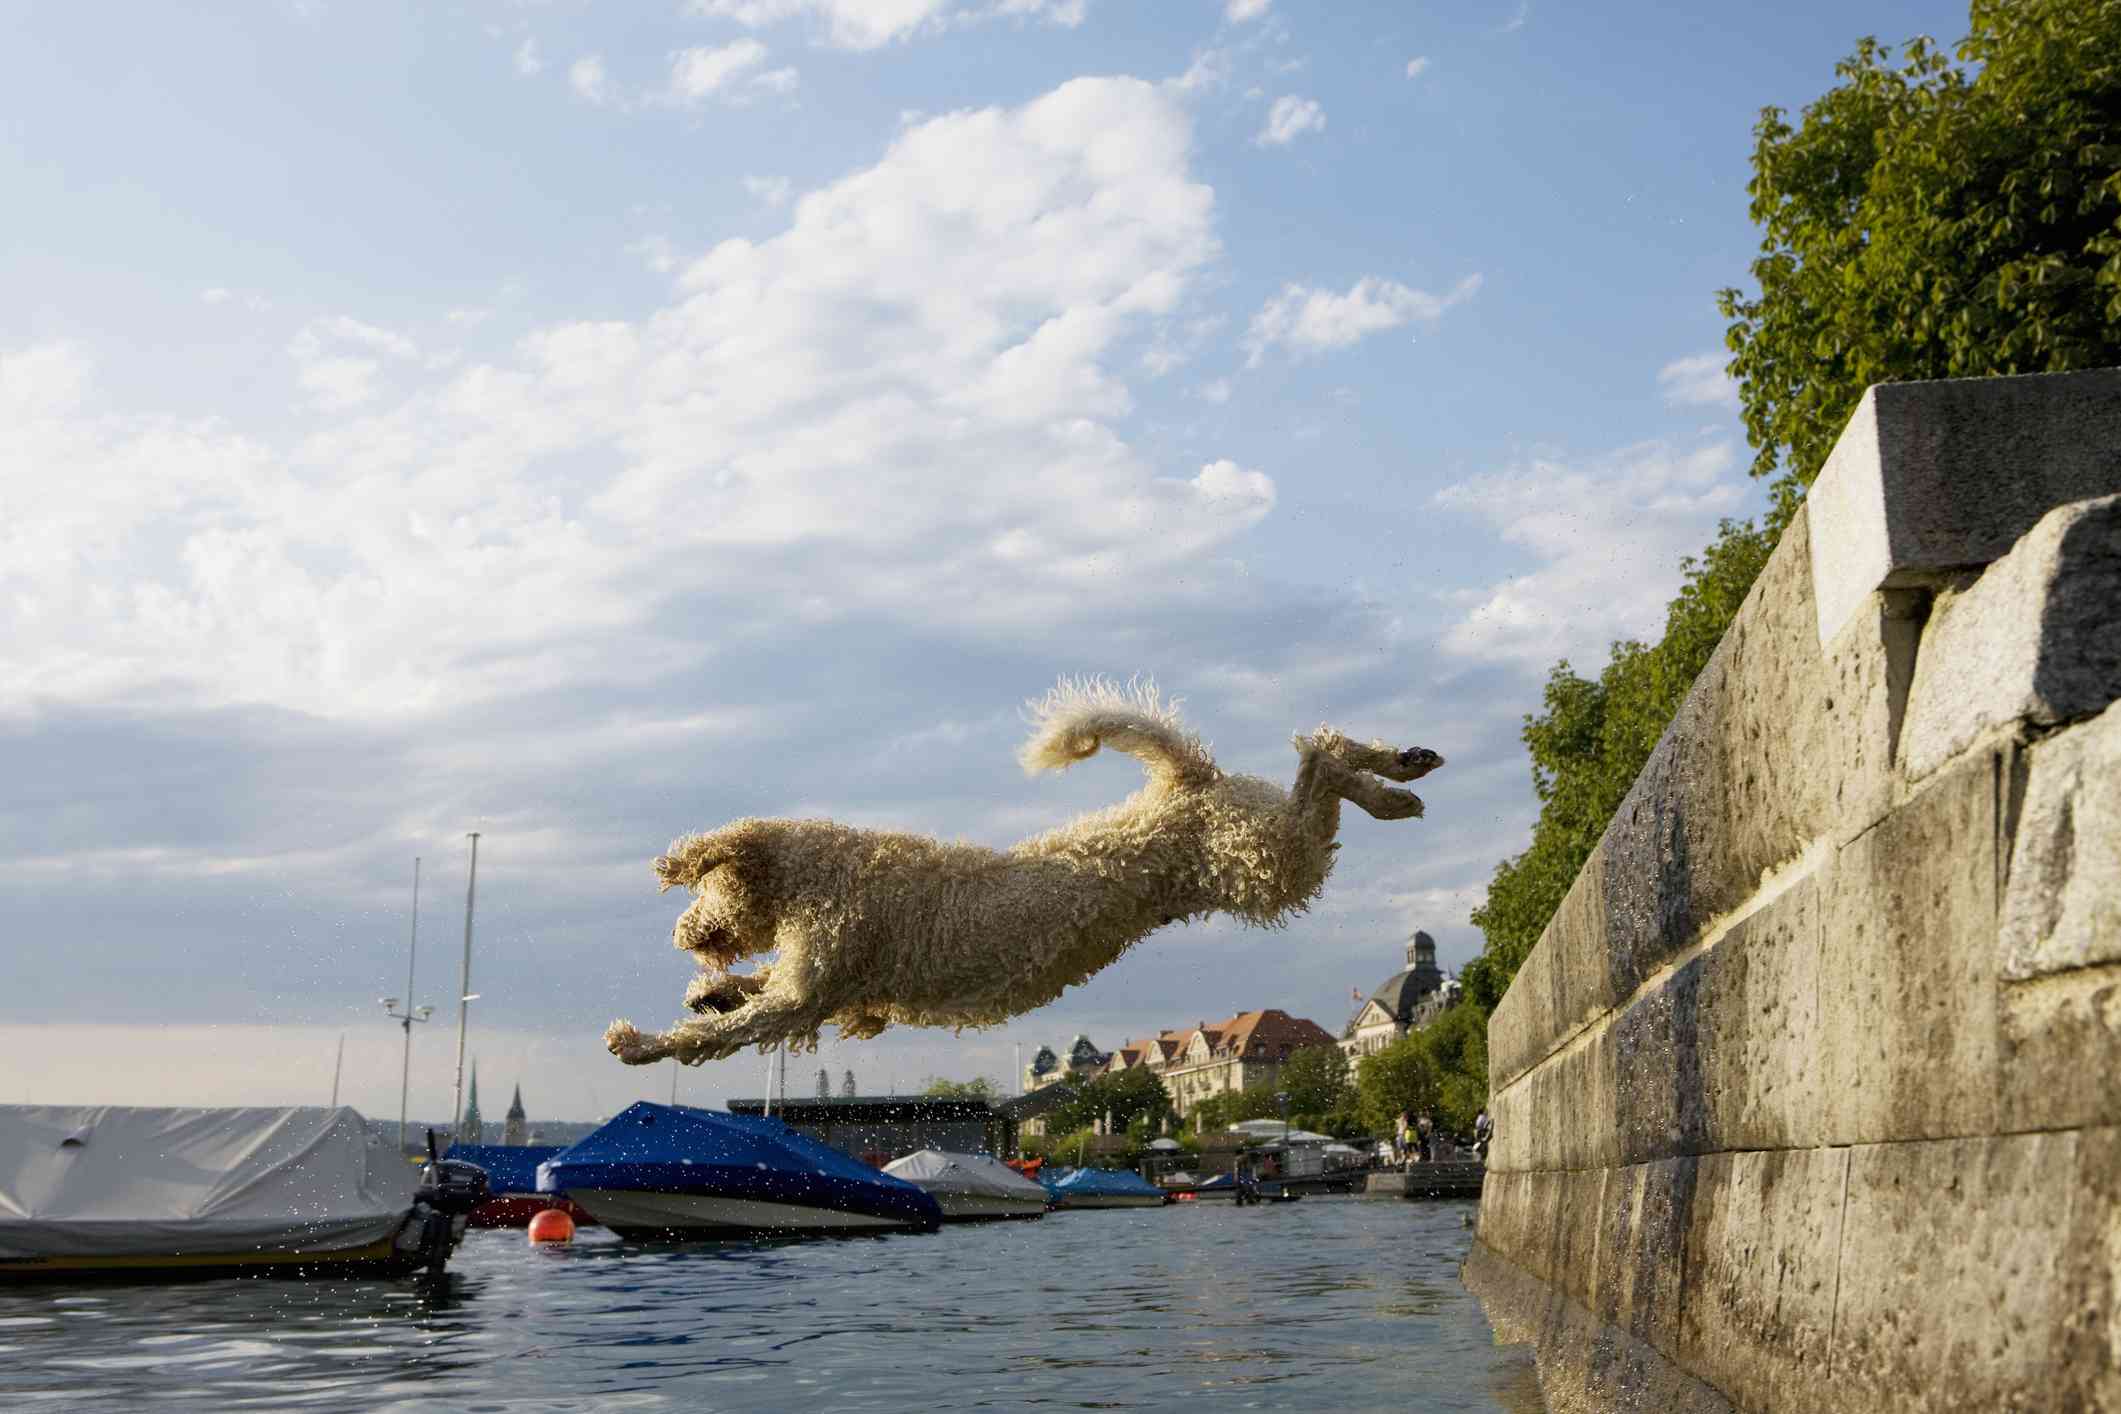 Portuguese water dog leaping into water